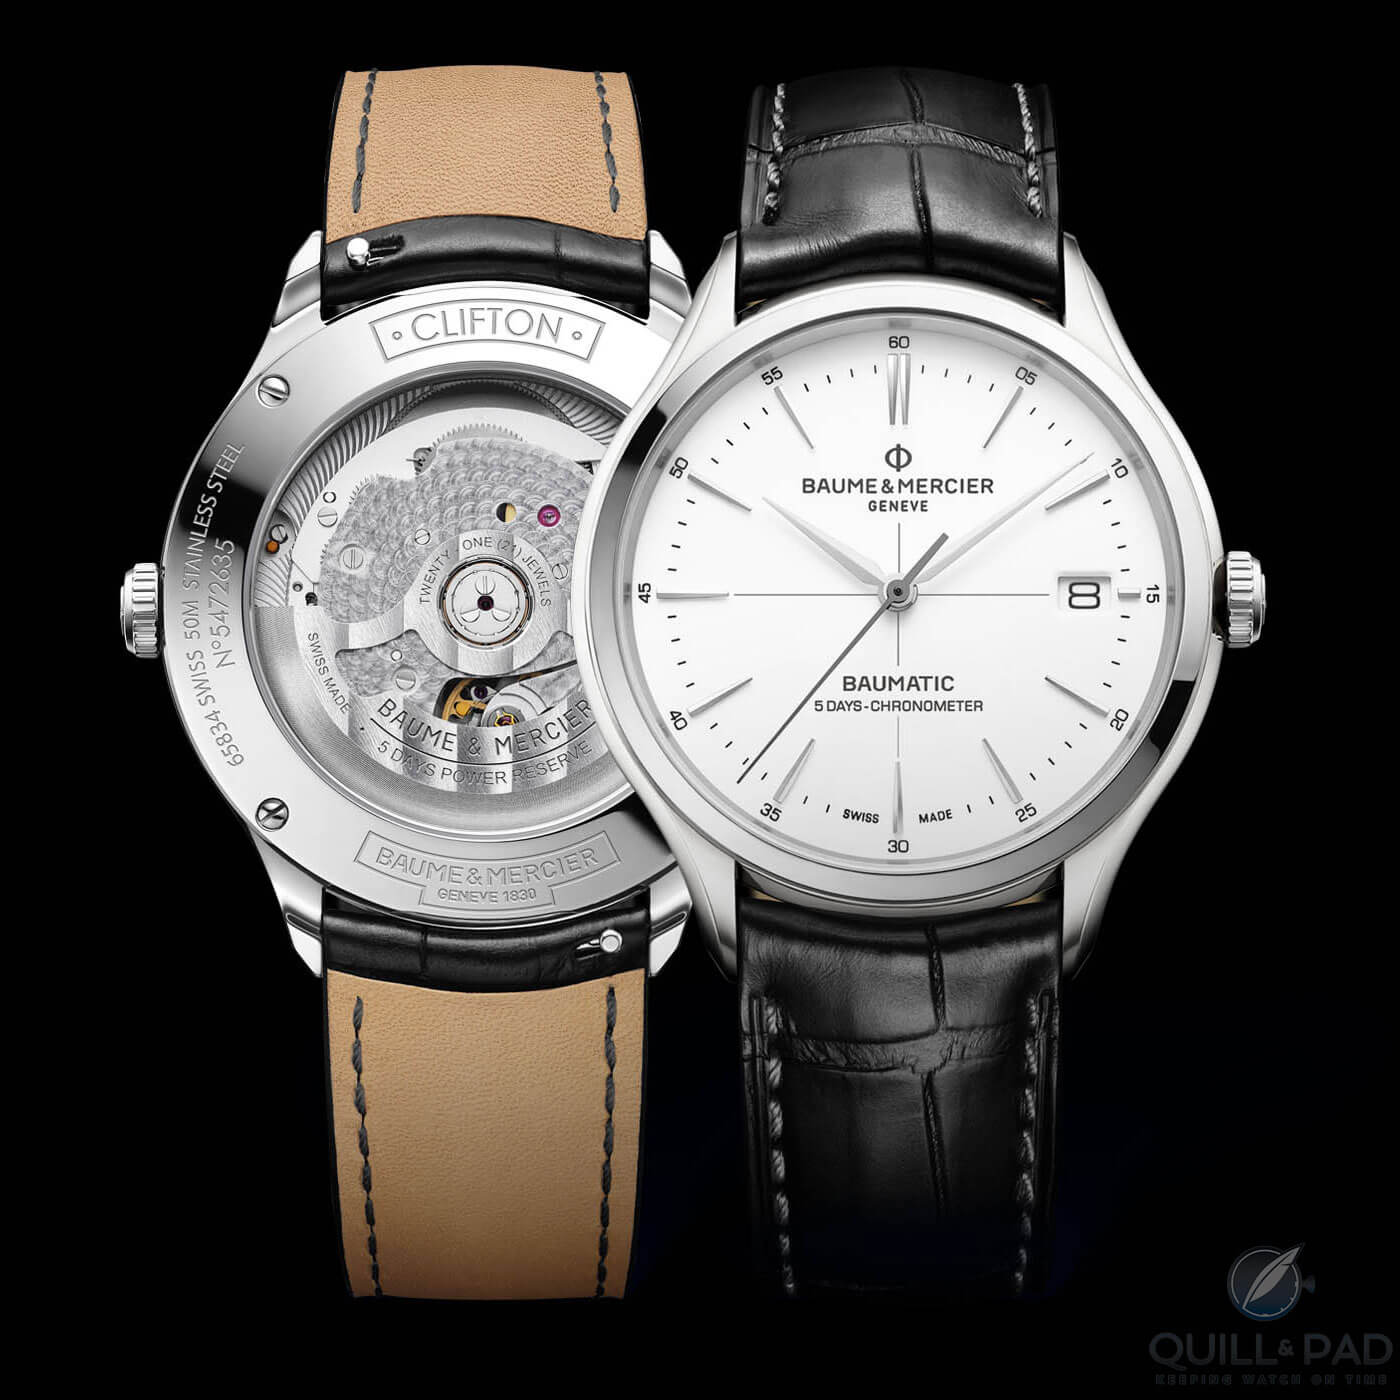 Views from the front and back of the Baume & Mercier Clifton Baumatic